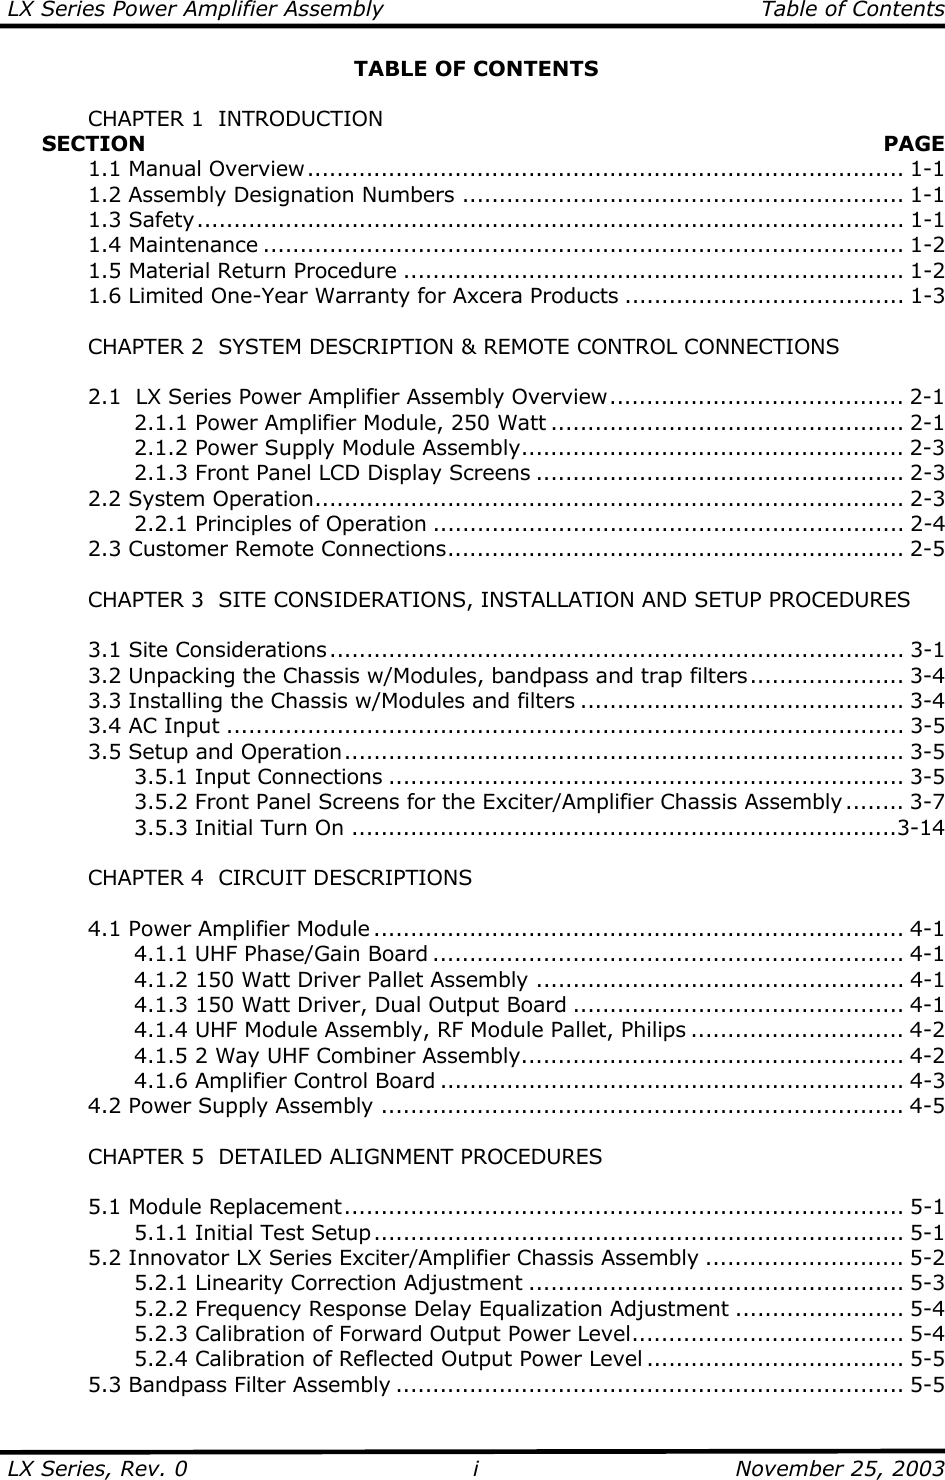 LX Series Power Amplifier Assembly    Table of Contents  LX Series, Rev. 0    November 25, 2003 iTABLE OF CONTENTS    CHAPTER 1  INTRODUCTION      SECTION   PAGE  1.1 Manual Overview................................................................................. 1-1   1.2 Assembly Designation Numbers ............................................................ 1-1  1.3 Safety................................................................................................ 1-1  1.4 Maintenance ....................................................................................... 1-2   1.5 Material Return Procedure .................................................................... 1-2   1.6 Limited One-Year Warranty for Axcera Products ...................................... 1-3    CHAPTER 2  SYSTEM DESCRIPTION &amp; REMOTE CONTROL CONNECTIONS    2.1  LX Series Power Amplifier Assembly Overview........................................ 2-1     2.1.1 Power Amplifier Module, 250 Watt ................................................ 2-1     2.1.2 Power Supply Module Assembly.................................................... 2-3     2.1.3 Front Panel LCD Display Screens .................................................. 2-3  2.2 System Operation................................................................................ 2-3     2.2.1 Principles of Operation ................................................................ 2-4  2.3 Customer Remote Connections.............................................................. 2-5      CHAPTER 3  SITE CONSIDERATIONS, INSTALLATION AND SETUP PROCEDURES     3.1 Site Considerations.............................................................................. 3-1   3.2 Unpacking the Chassis w/Modules, bandpass and trap filters..................... 3-4   3.3 Installing the Chassis w/Modules and filters ............................................ 3-4   3.4 AC Input ............................................................................................ 3-5  3.5 Setup and Operation............................................................................ 3-5   3.5.1 Input Connections ...................................................................... 3-5     3.5.2 Front Panel Screens for the Exciter/Amplifier Chassis Assembly ........ 3-7   3.5.3 Initial Turn On ..........................................................................3-14    CHAPTER 4  CIRCUIT DESCRIPTIONS    4.1 Power Amplifier Module ........................................................................ 4-1     4.1.1 UHF Phase/Gain Board ................................................................ 4-1     4.1.2 150 Watt Driver Pallet Assembly .................................................. 4-1     4.1.3 150 Watt Driver, Dual Output Board ............................................. 4-1     4.1.4 UHF Module Assembly, RF Module Pallet, Philips ............................. 4-2     4.1.5 2 Way UHF Combiner Assembly.................................................... 4-2     4.1.6 Amplifier Control Board ............................................................... 4-3   4.2 Power Supply Assembly ....................................................................... 4-5    CHAPTER 5  DETAILED ALIGNMENT PROCEDURES   5.1 Module Replacement............................................................................ 5-1   5.1.1 Initial Test Setup........................................................................ 5-1   5.2 Innovator LX Series Exciter/Amplifier Chassis Assembly ........................... 5-2     5.2.1 Linearity Correction Adjustment ................................................... 5-3     5.2.2 Frequency Response Delay Equalization Adjustment ....................... 5-4     5.2.3 Calibration of Forward Output Power Level..................................... 5-4     5.2.4 Calibration of Reflected Output Power Level ................................... 5-5   5.3 Bandpass Filter Assembly ..................................................................... 5-5 